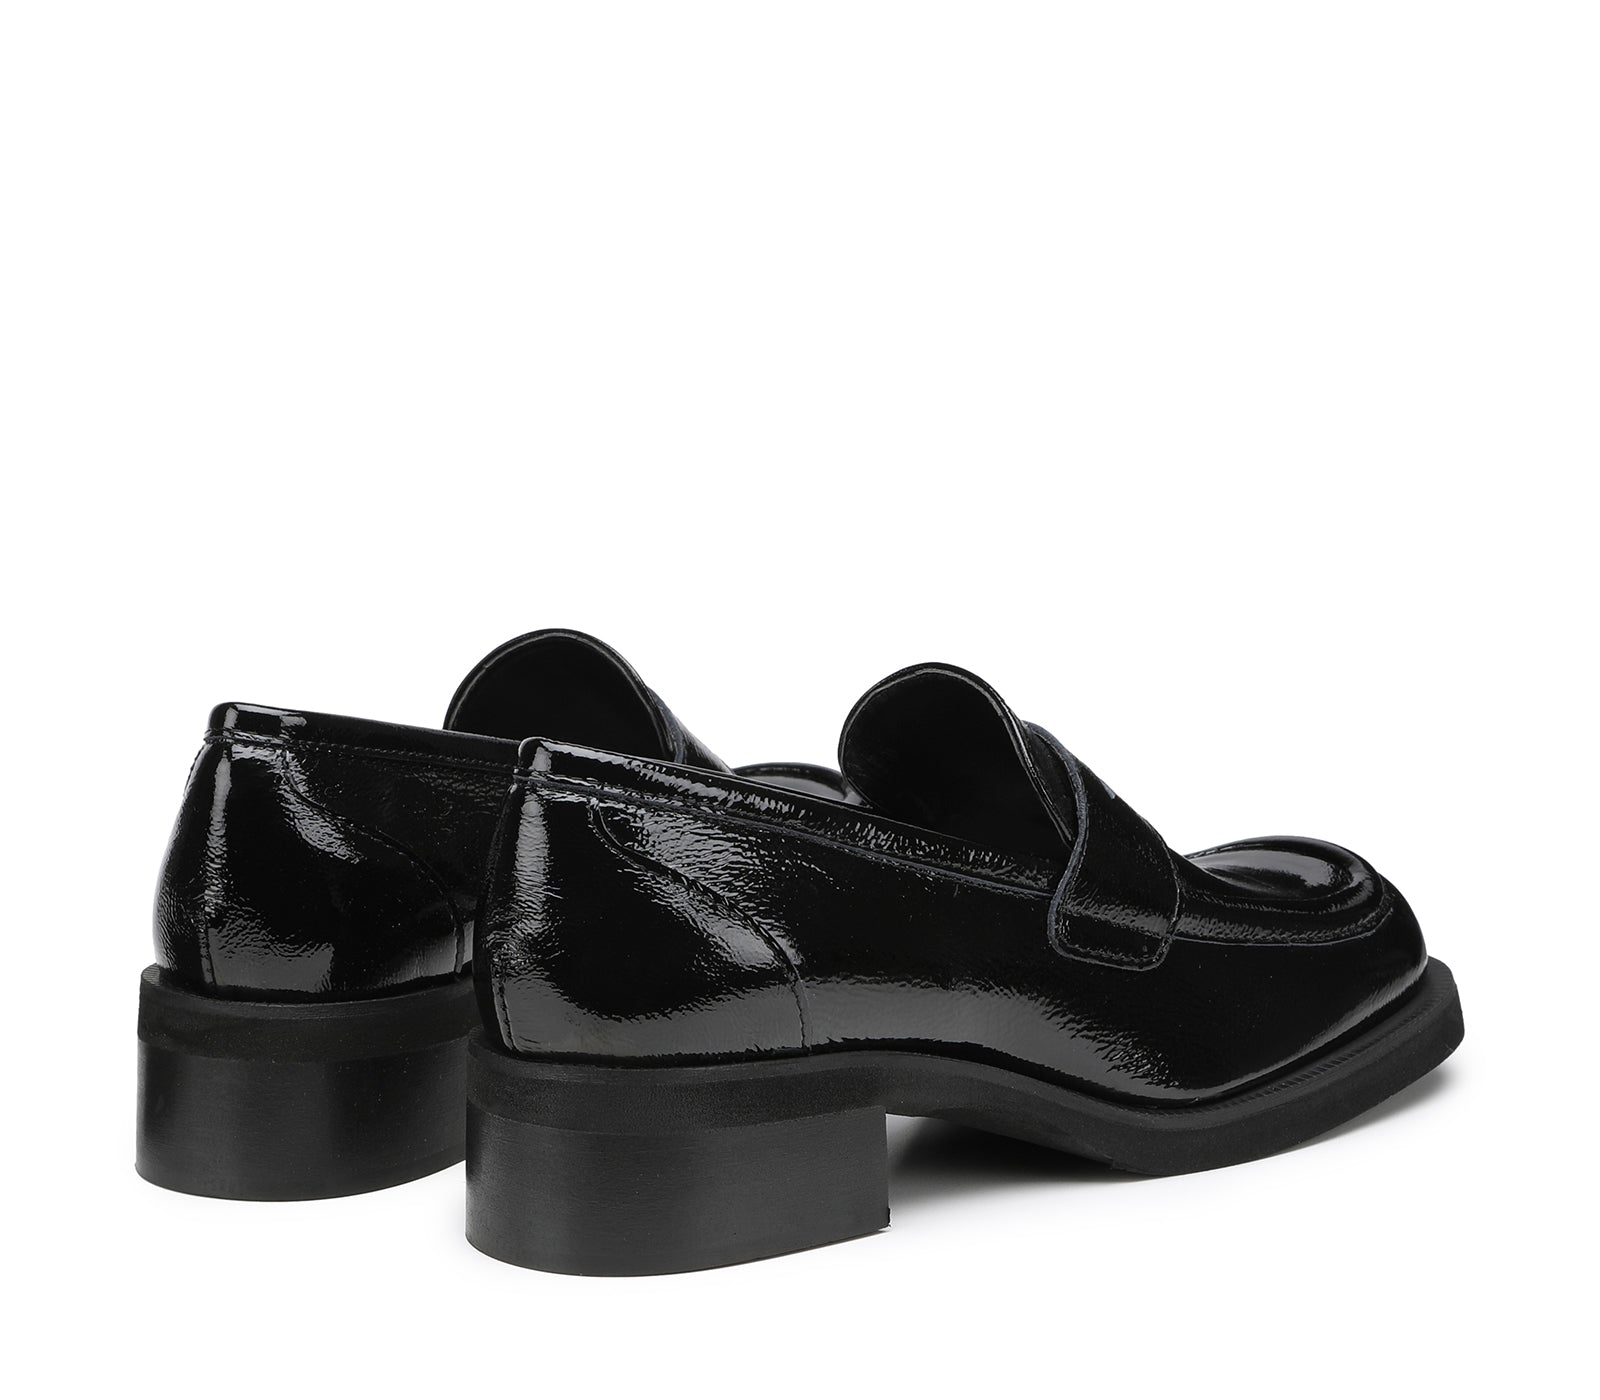 Women's Moccasins in Black Patent Leather with Square Toe and Rubber Sole